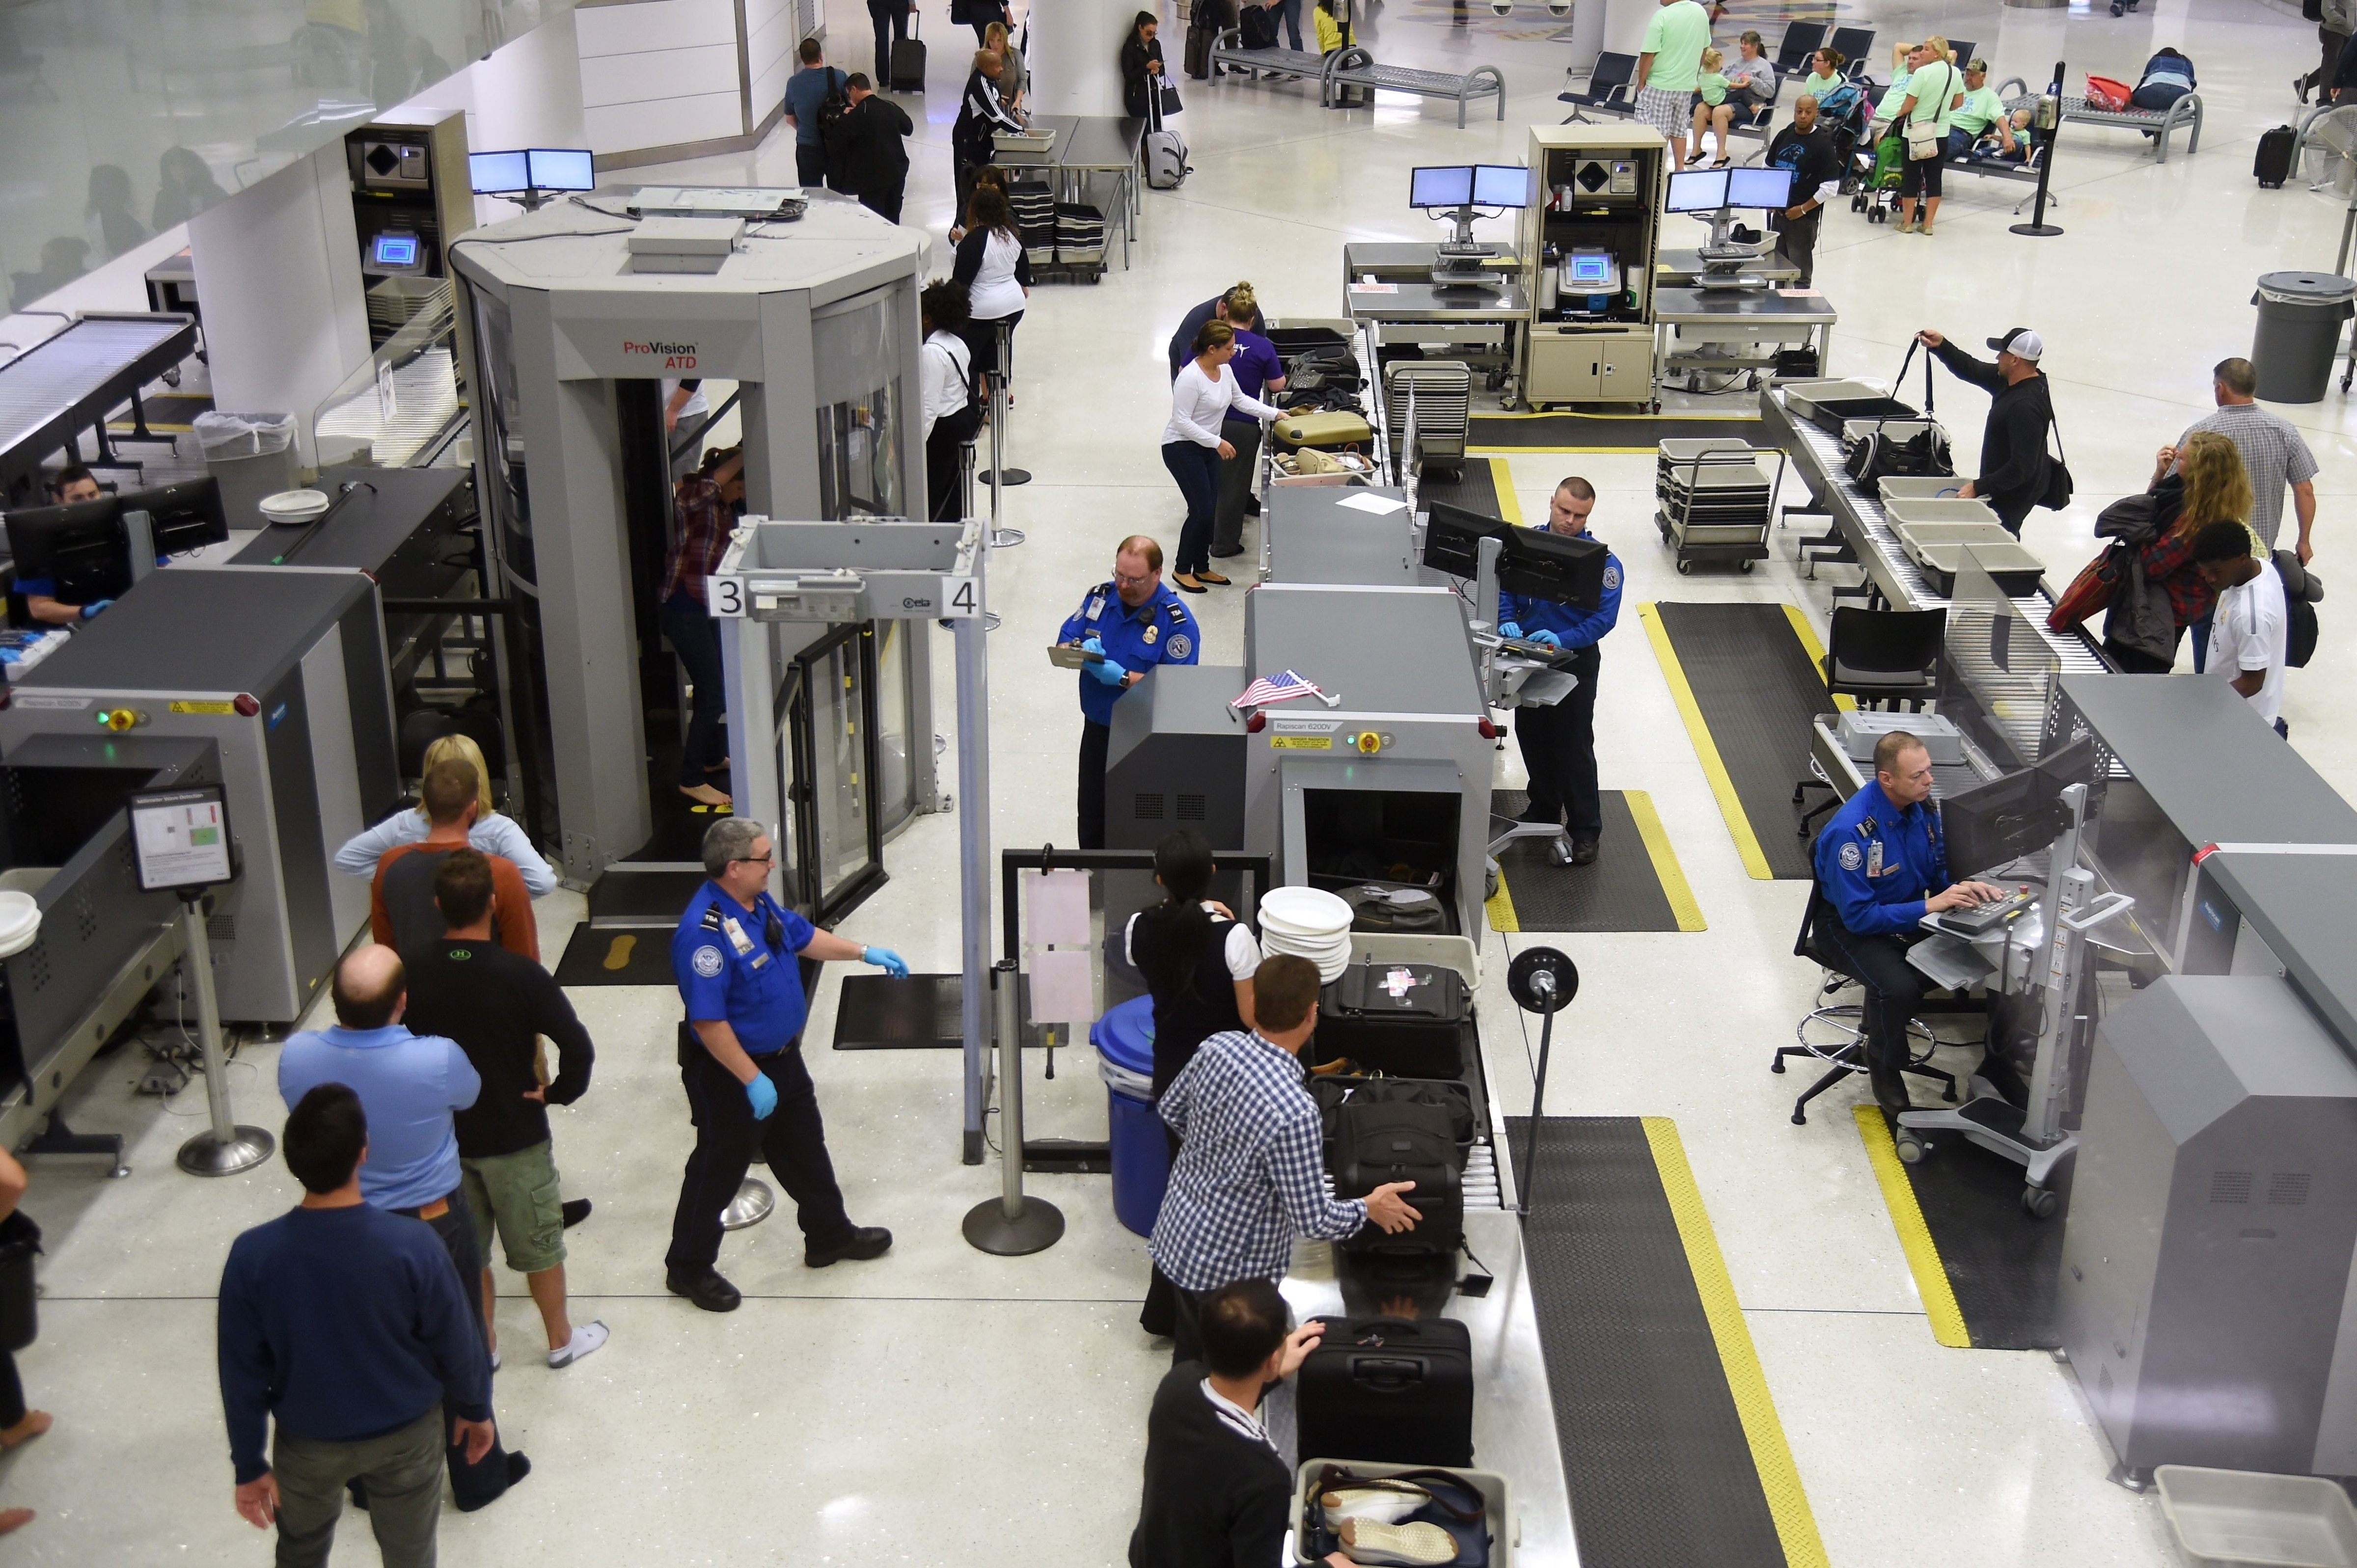 U.S. Transportation Security Administration (TSA) officers inspect airline passengers at Lambert St. Louis International Airport in Missouri, Oct.10, 2016. (Robyn Beck—AFP/Getty Images)